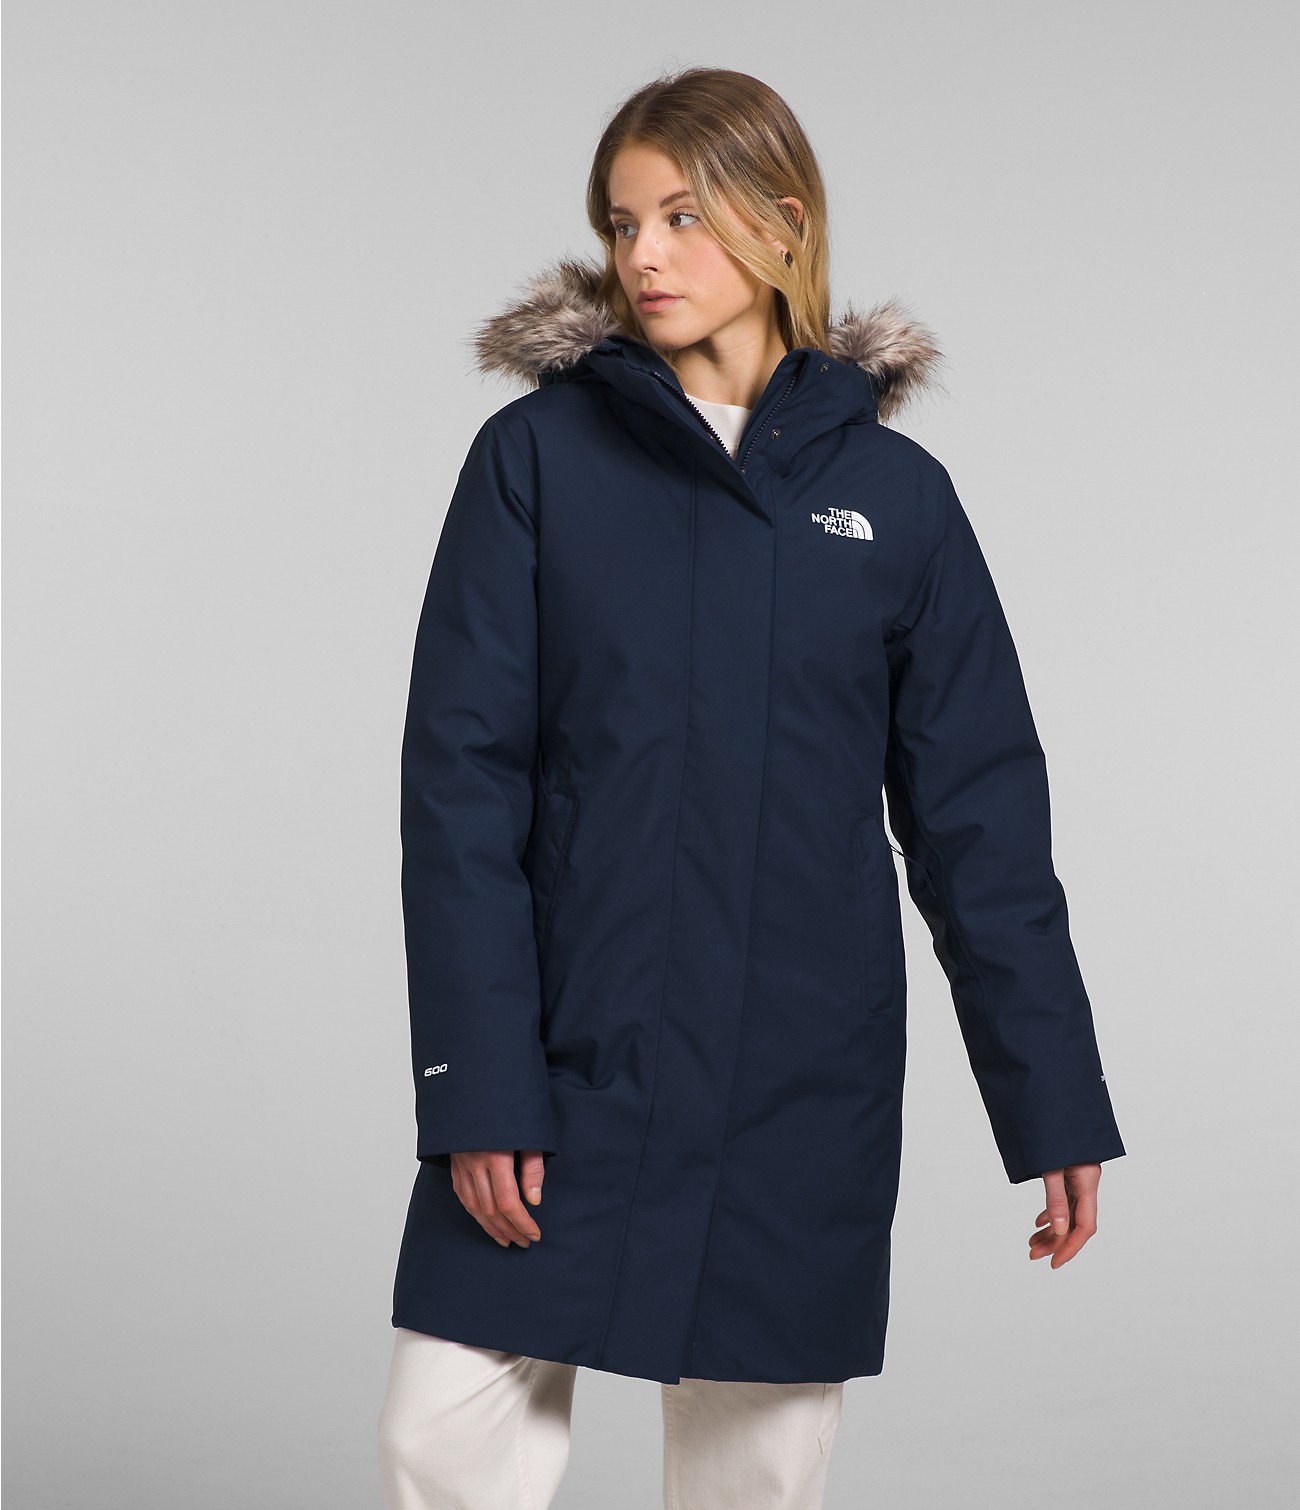 Unlock Wilderness' choice in the Woolrich Vs North Face comparison, the Arctic Parka by The North Face